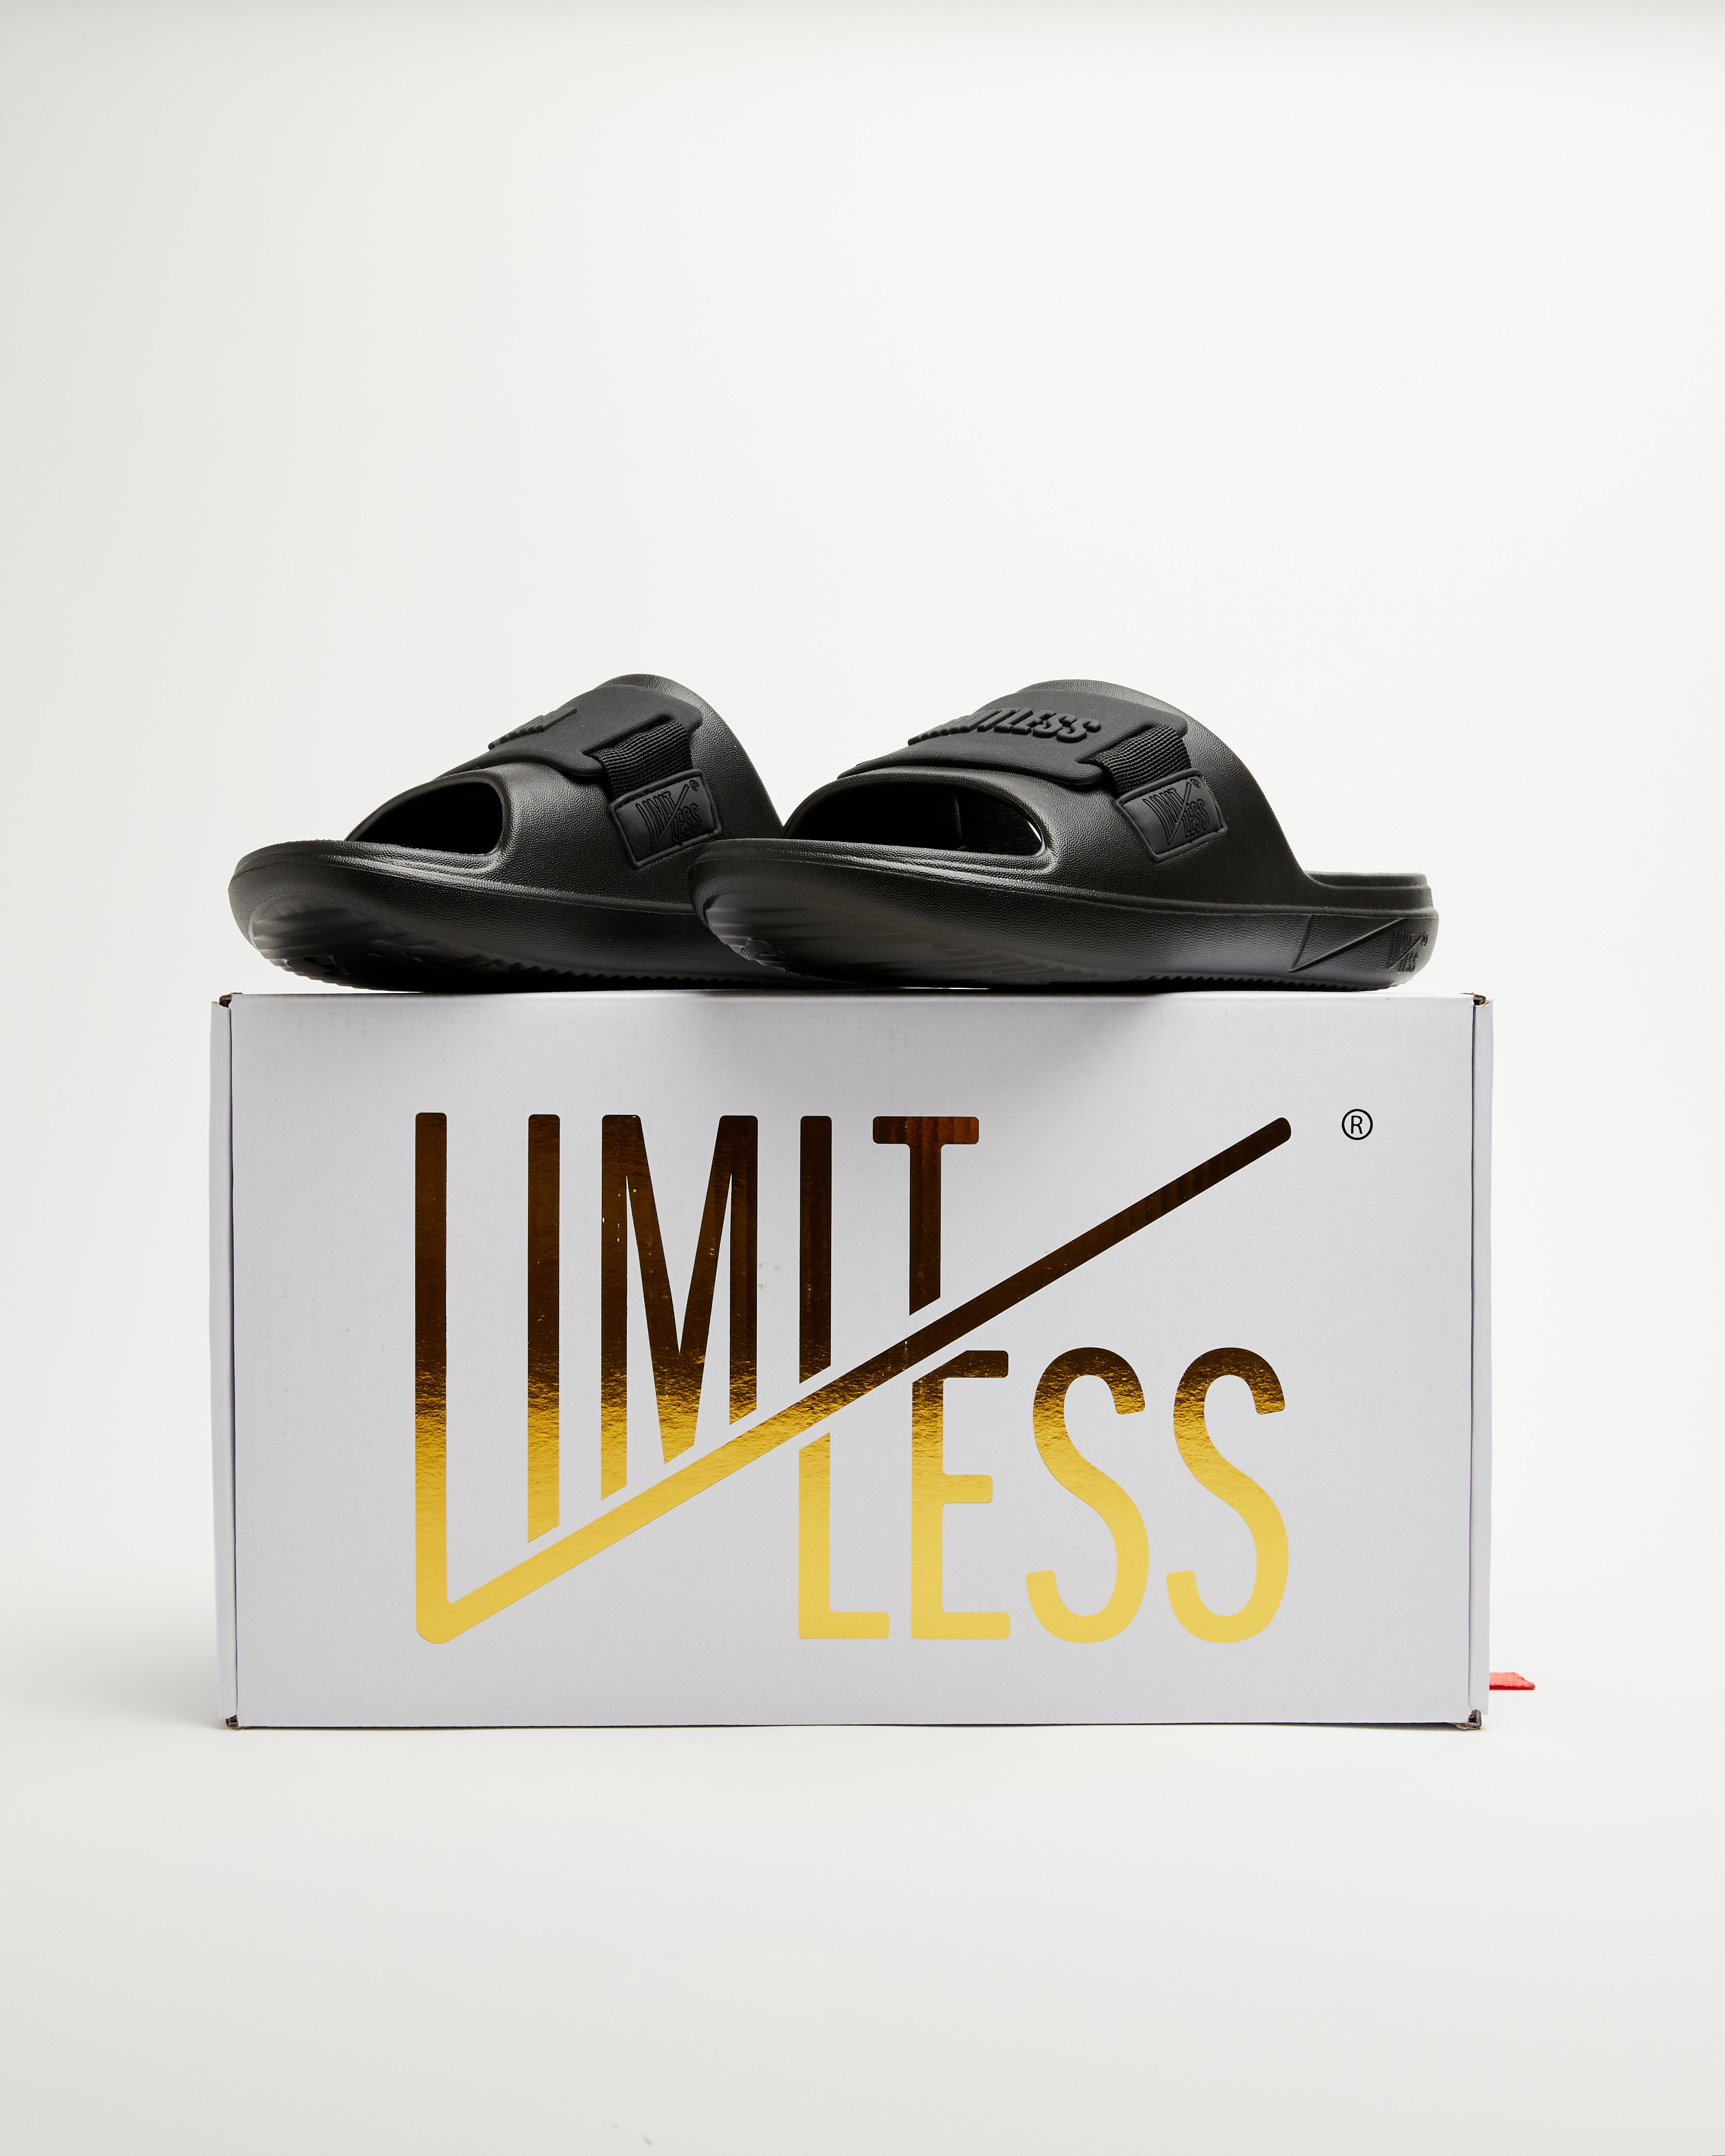 LIMITLESS SLIDES™ WITH ESSENTIAL TIBAH™ QUAD - LEE'S SUMMIT WEST HIGH SCHOOL